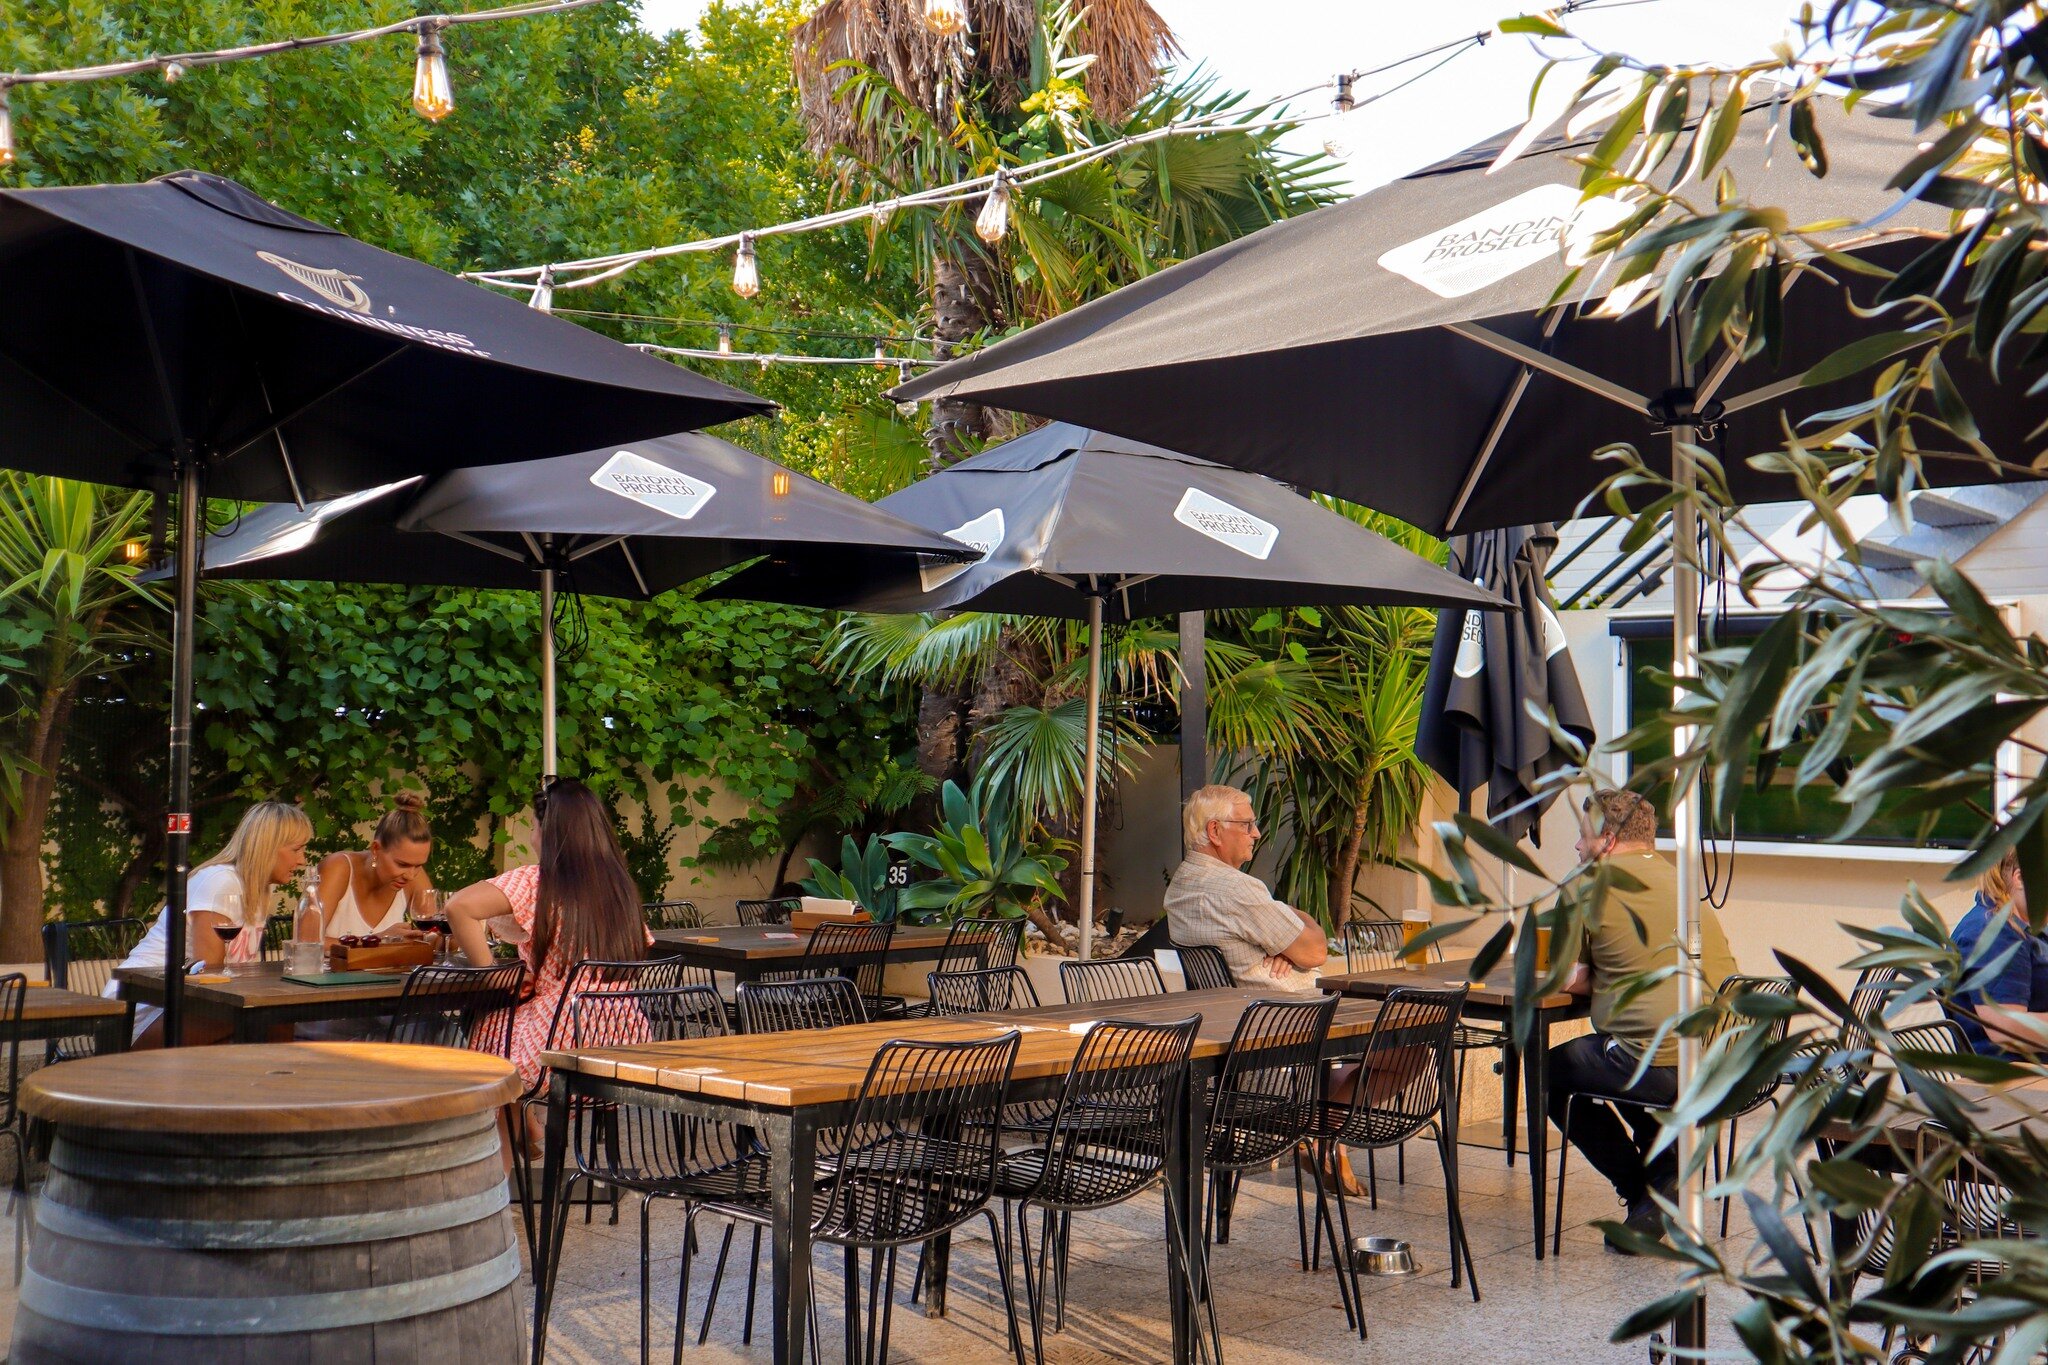 Happy hour is from 4pm-6pm at the Camden Hotel! Spend some time in our bar or courtyard enjoying this great offer! During happy hour we're serving glasses of house wine and schooners of Australian beer for only $8. But if cocktails are more your styl